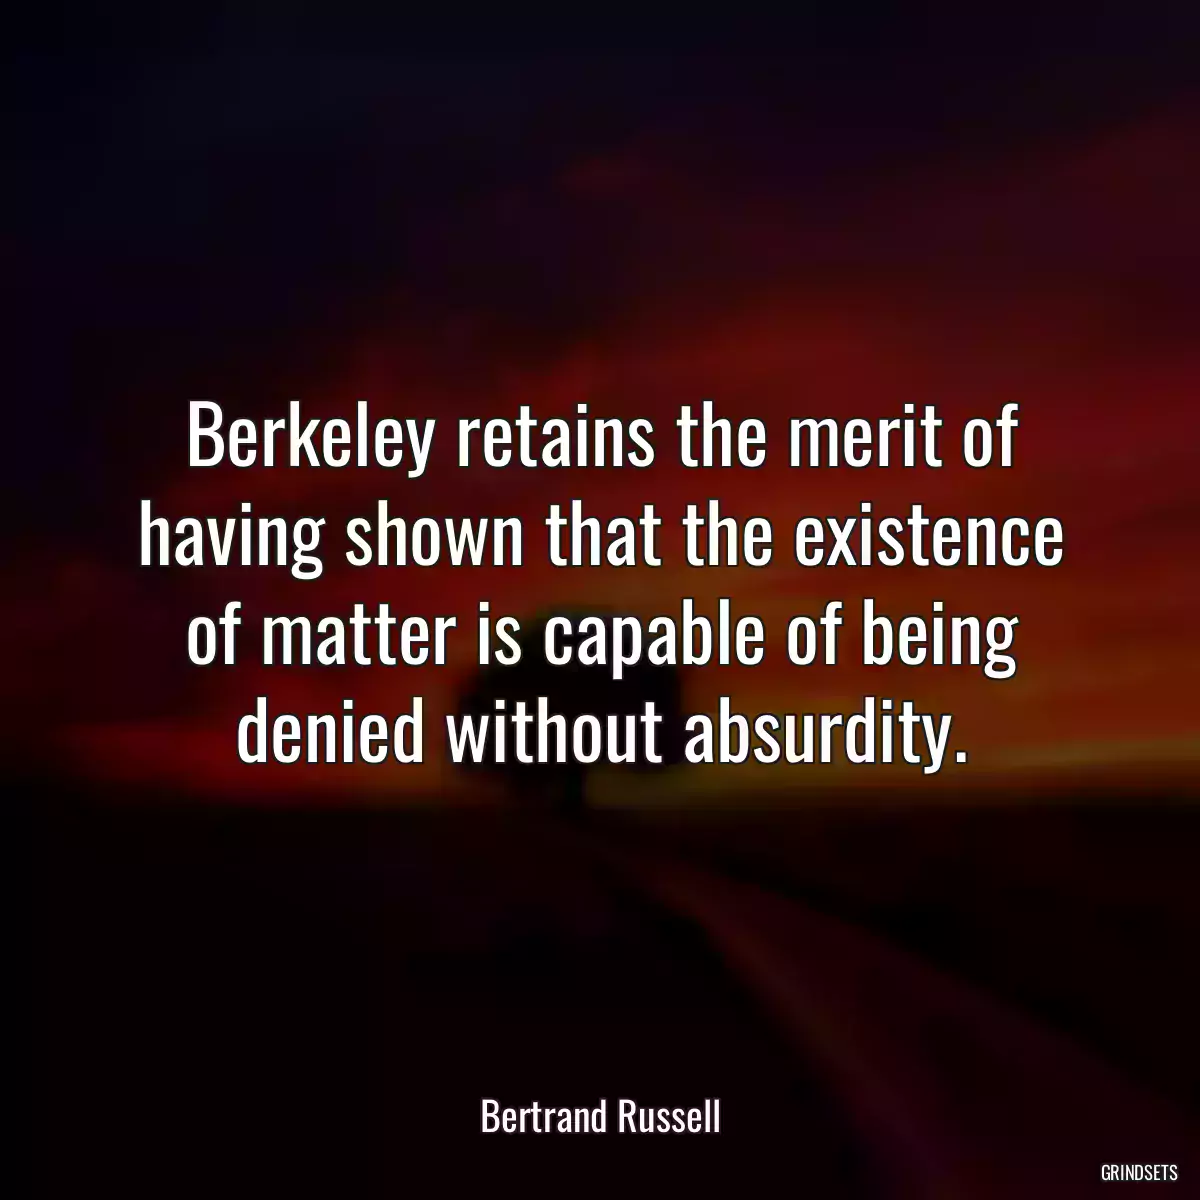 Berkeley retains the merit of having shown that the existence of matter is capable of being denied without absurdity.